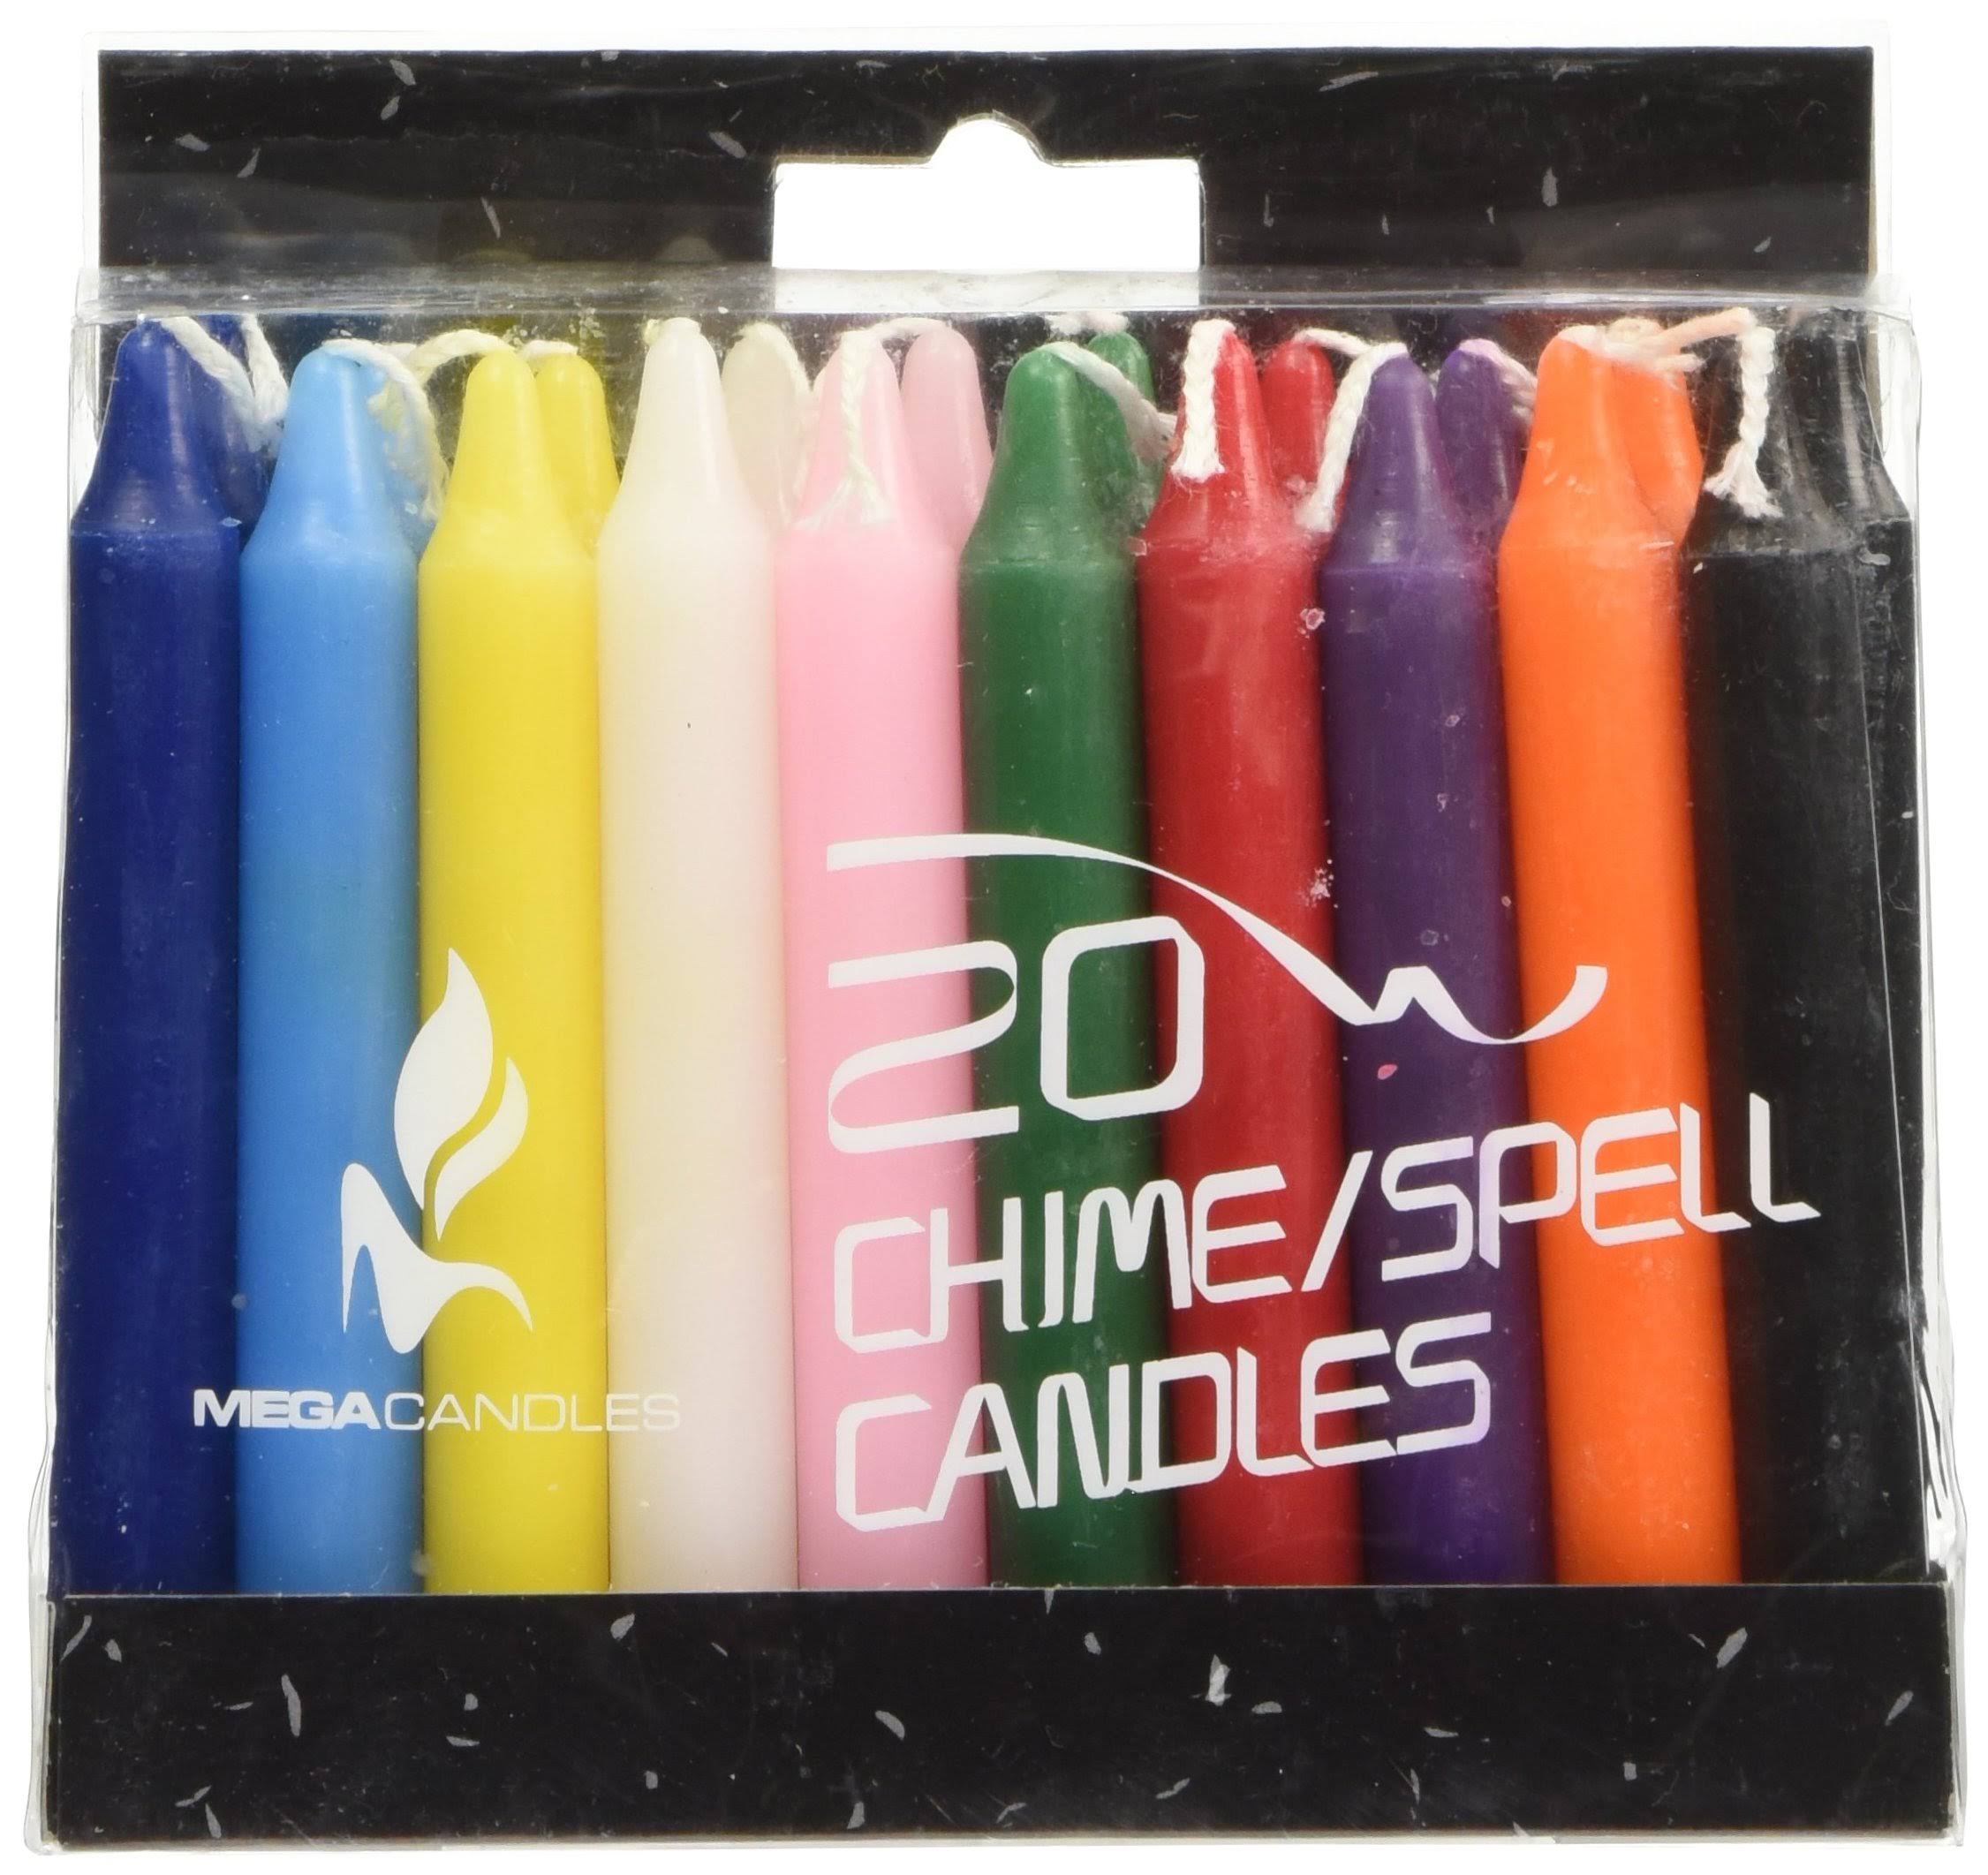 Mega Candles Unscented 4 Mini Chime Ritual Spell Taper Candle Set O